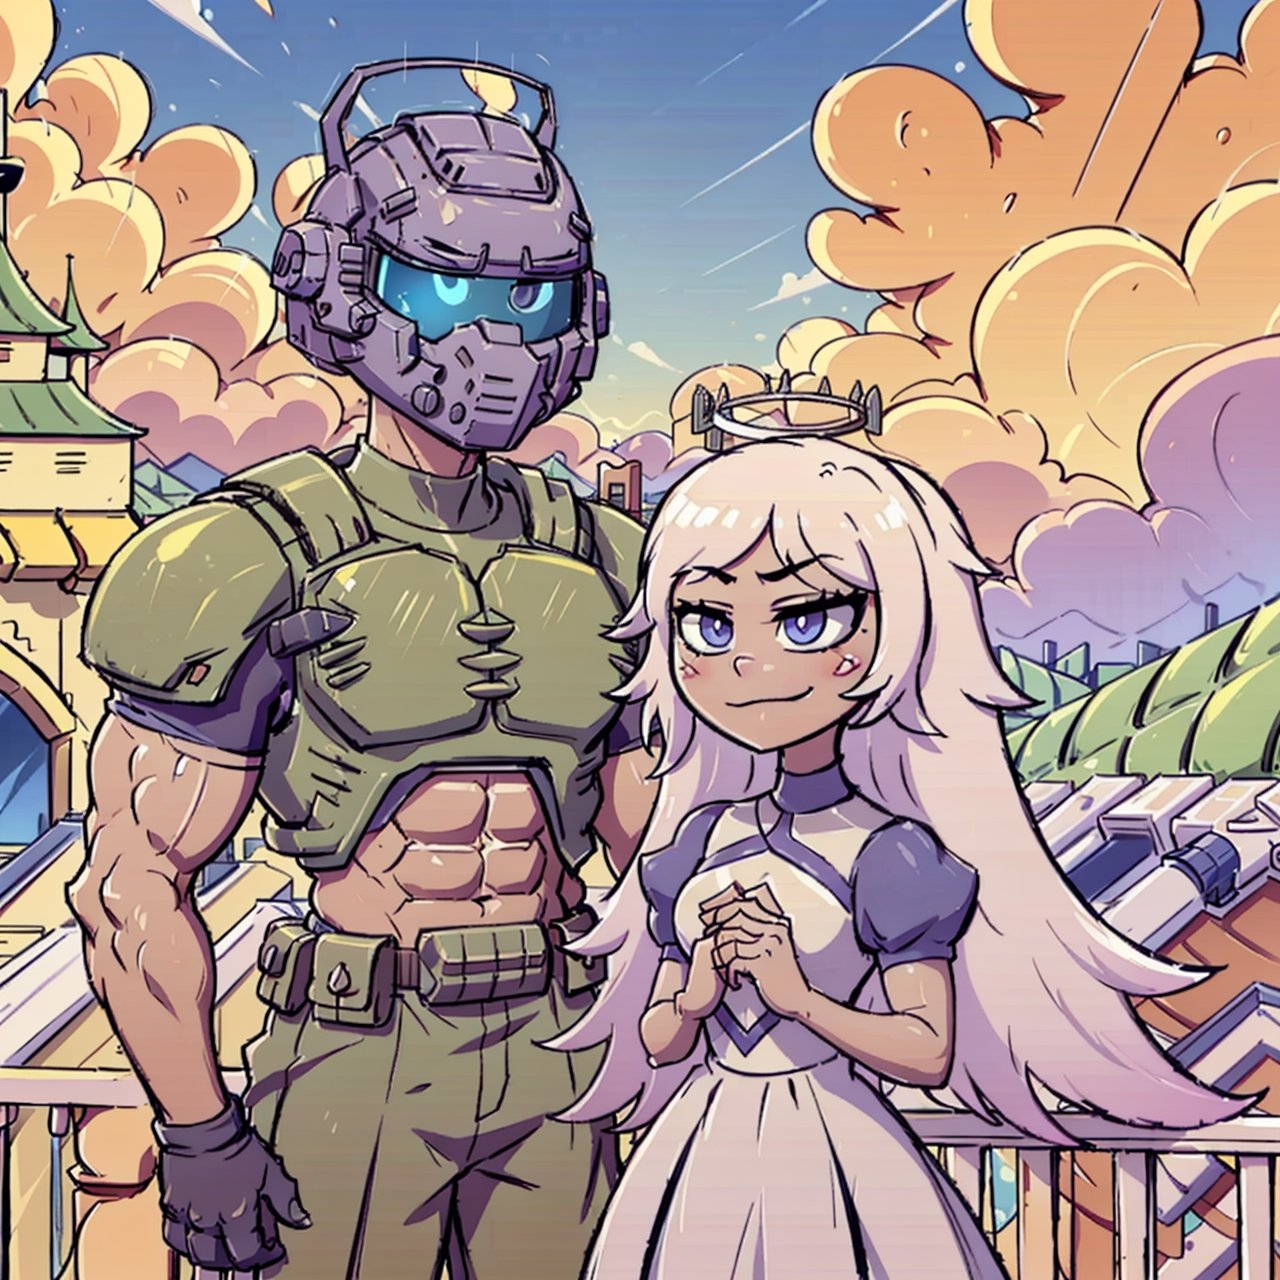 1boy(DoomGuy, tall, young, muscular, wearing doom helmet faceless, no hair, Doomguy(helmet)) and 1girl(Emily,slim body, cute, petite, wearing princess dress, long white hair, gentle and warm smile), (shot from distance), background(balcony, castle, rural area) (masterpiece, highres, high quality:1.2), ambient occlusion, outstanding colors, low saturation,High detailed,Detailedface,Dreamscape